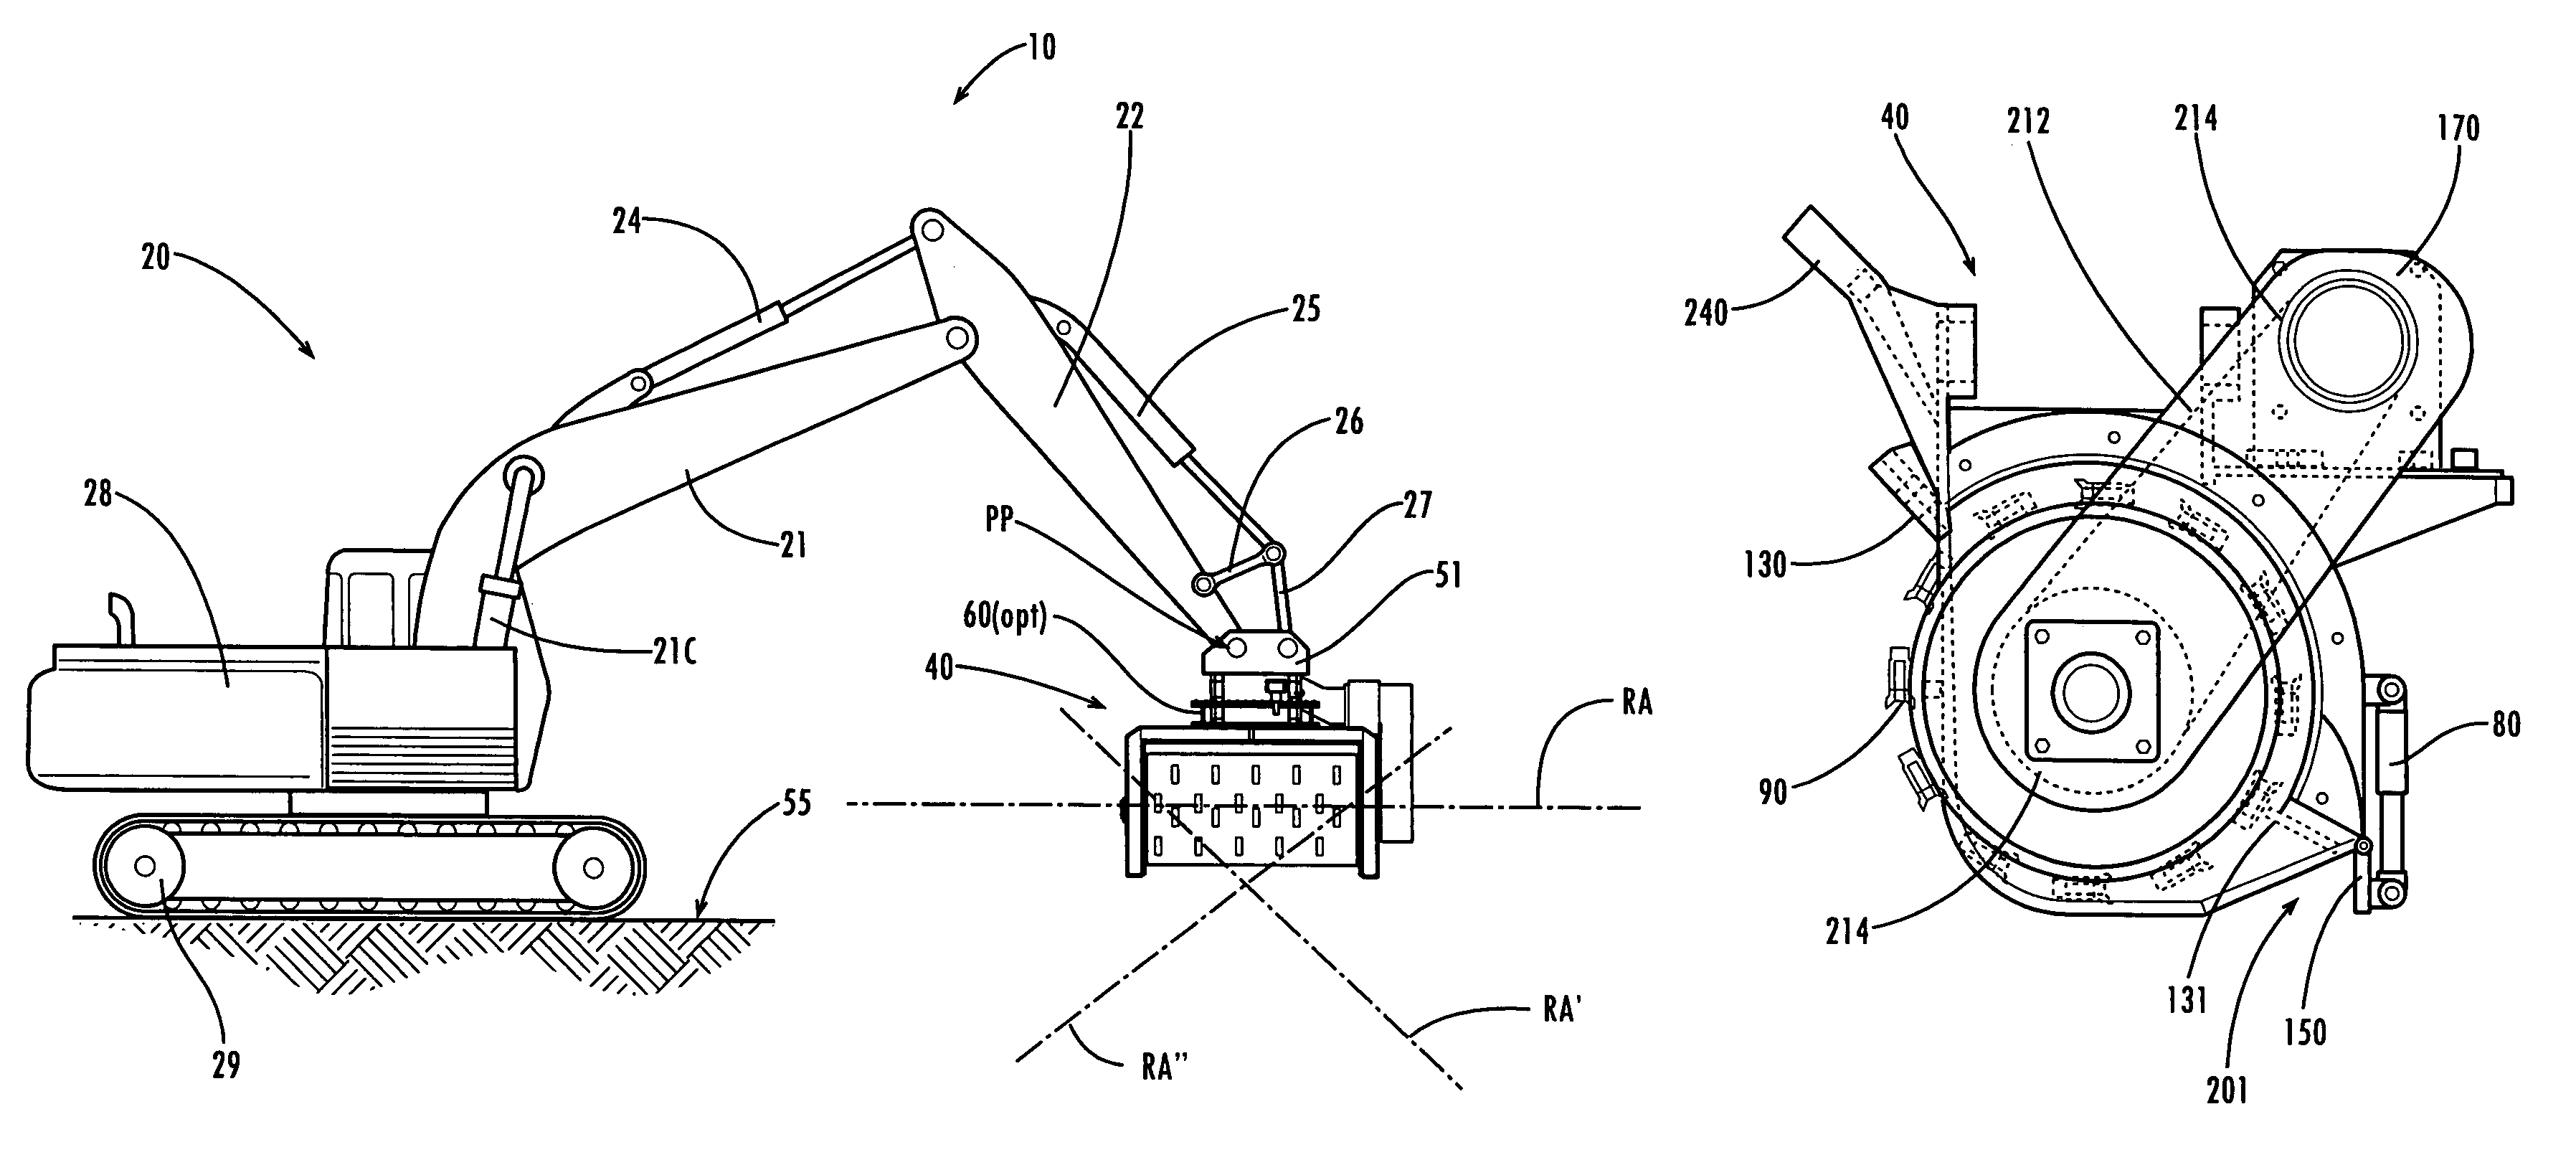 Portable apparatus for reducing vegetation and method for using same